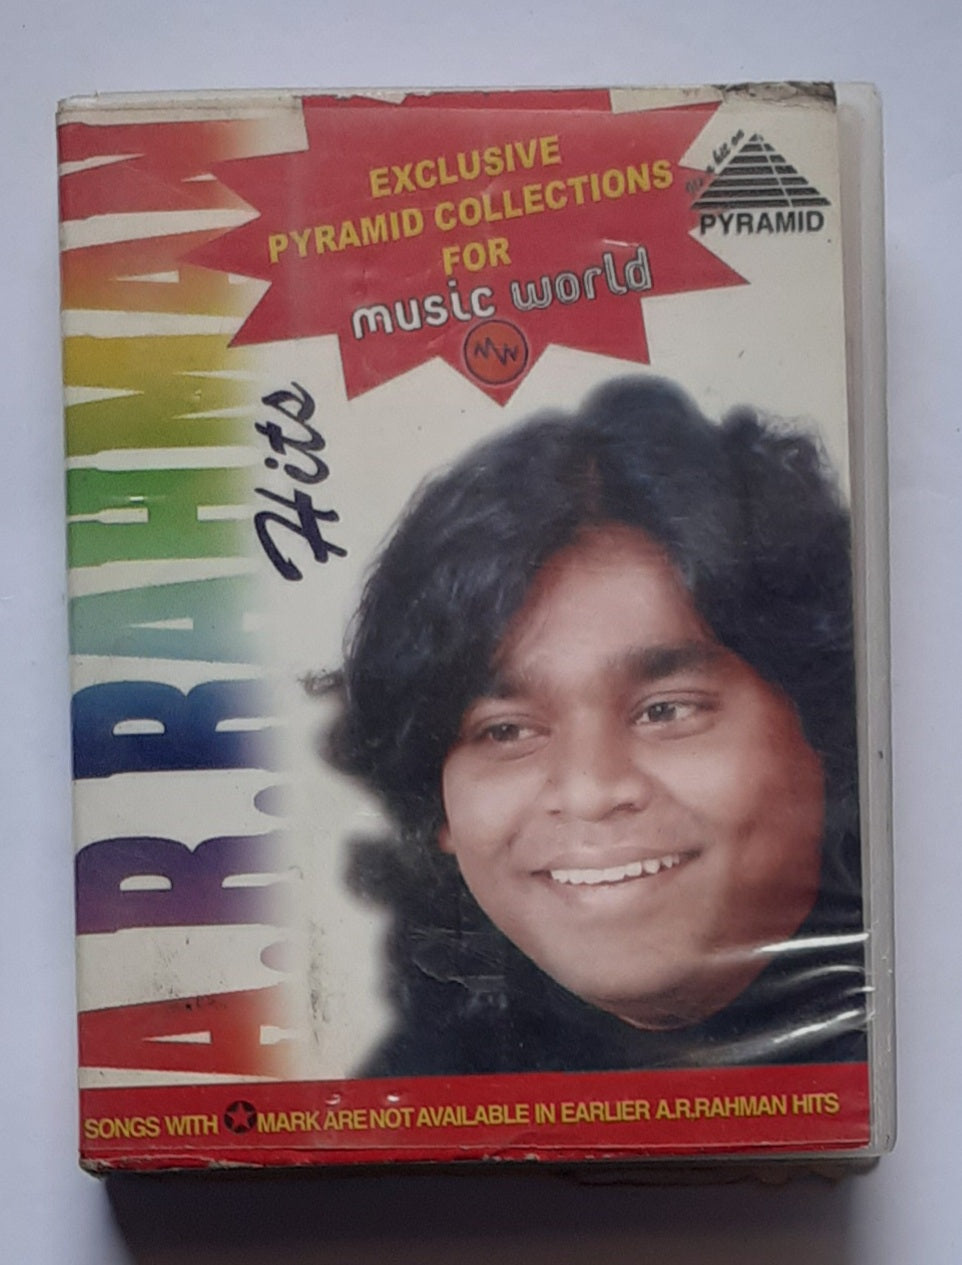 A. R. Rahman Hits - Exclusive Pyramid Collections For Music World  